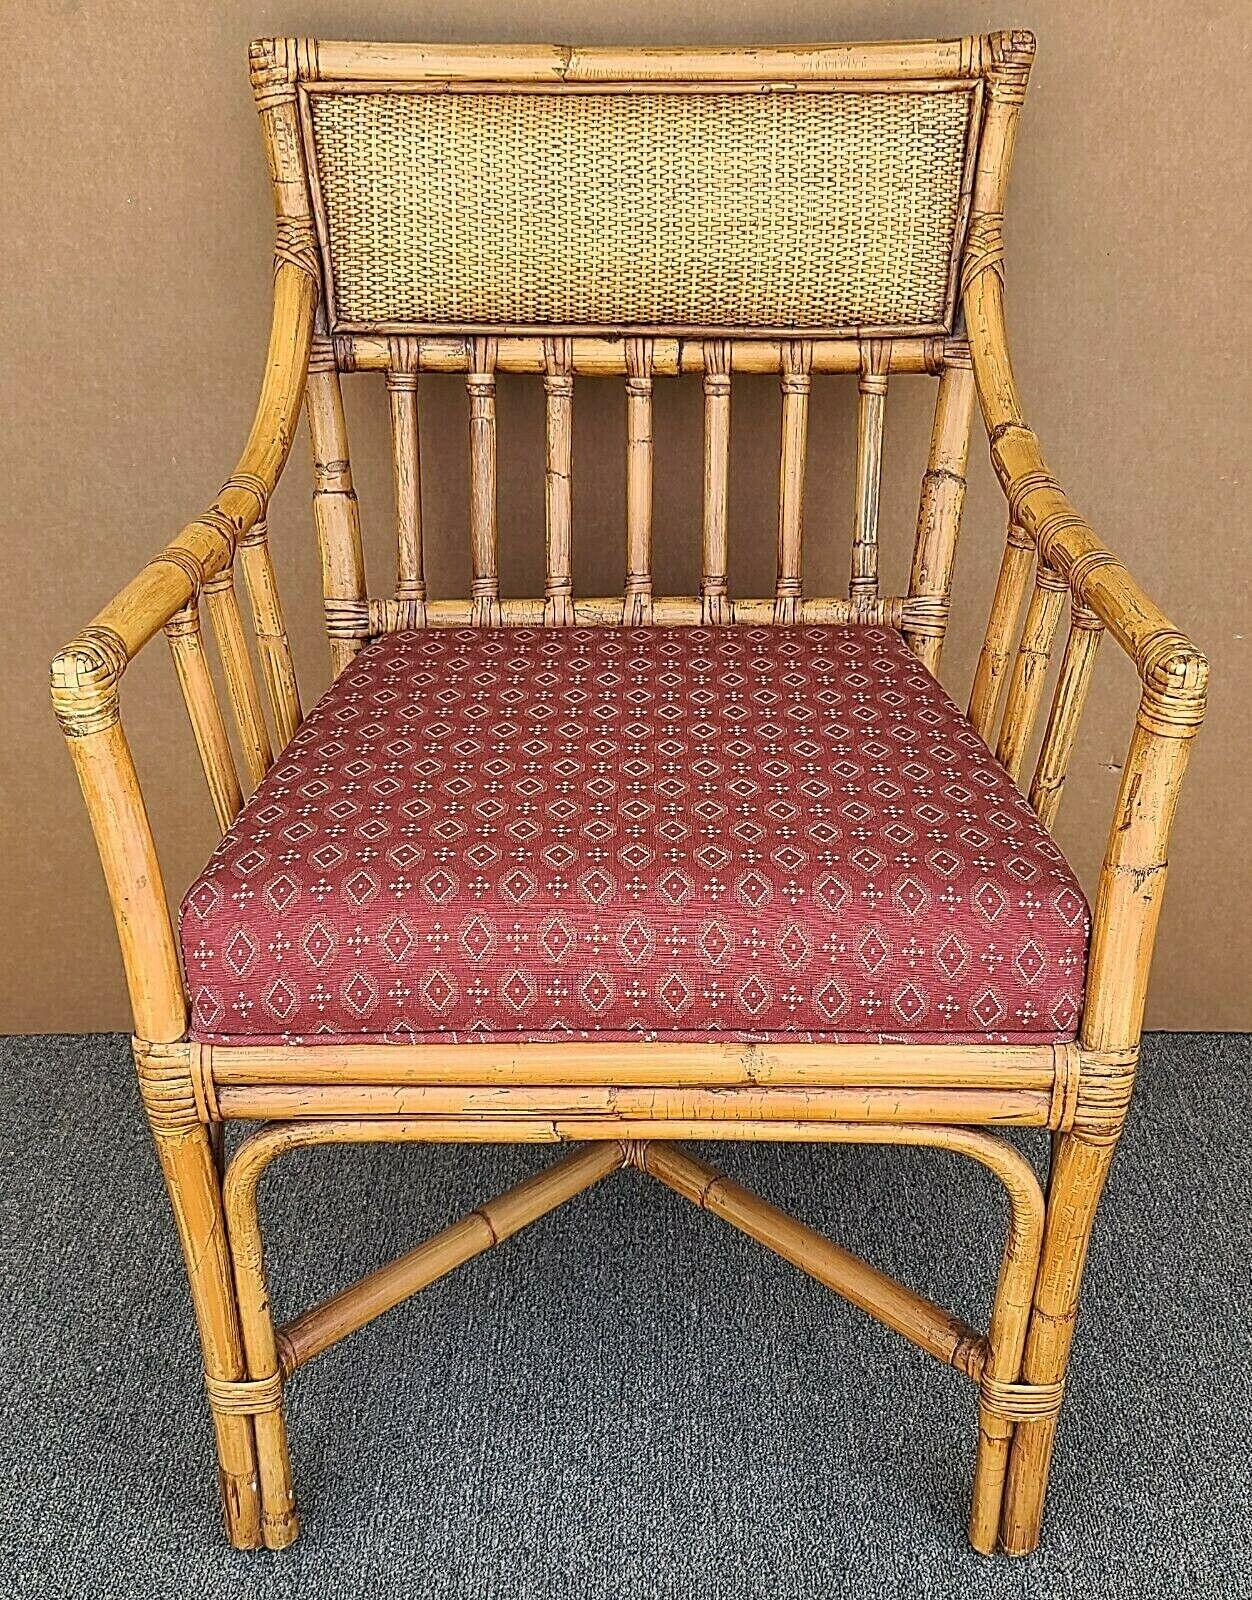 Offering One of our recent palm beach estate fine furniture acquisitions of a Palecek bamboo wicker rattan upholstered dining accent desk armchair

Approximate measurements in inches
34.5